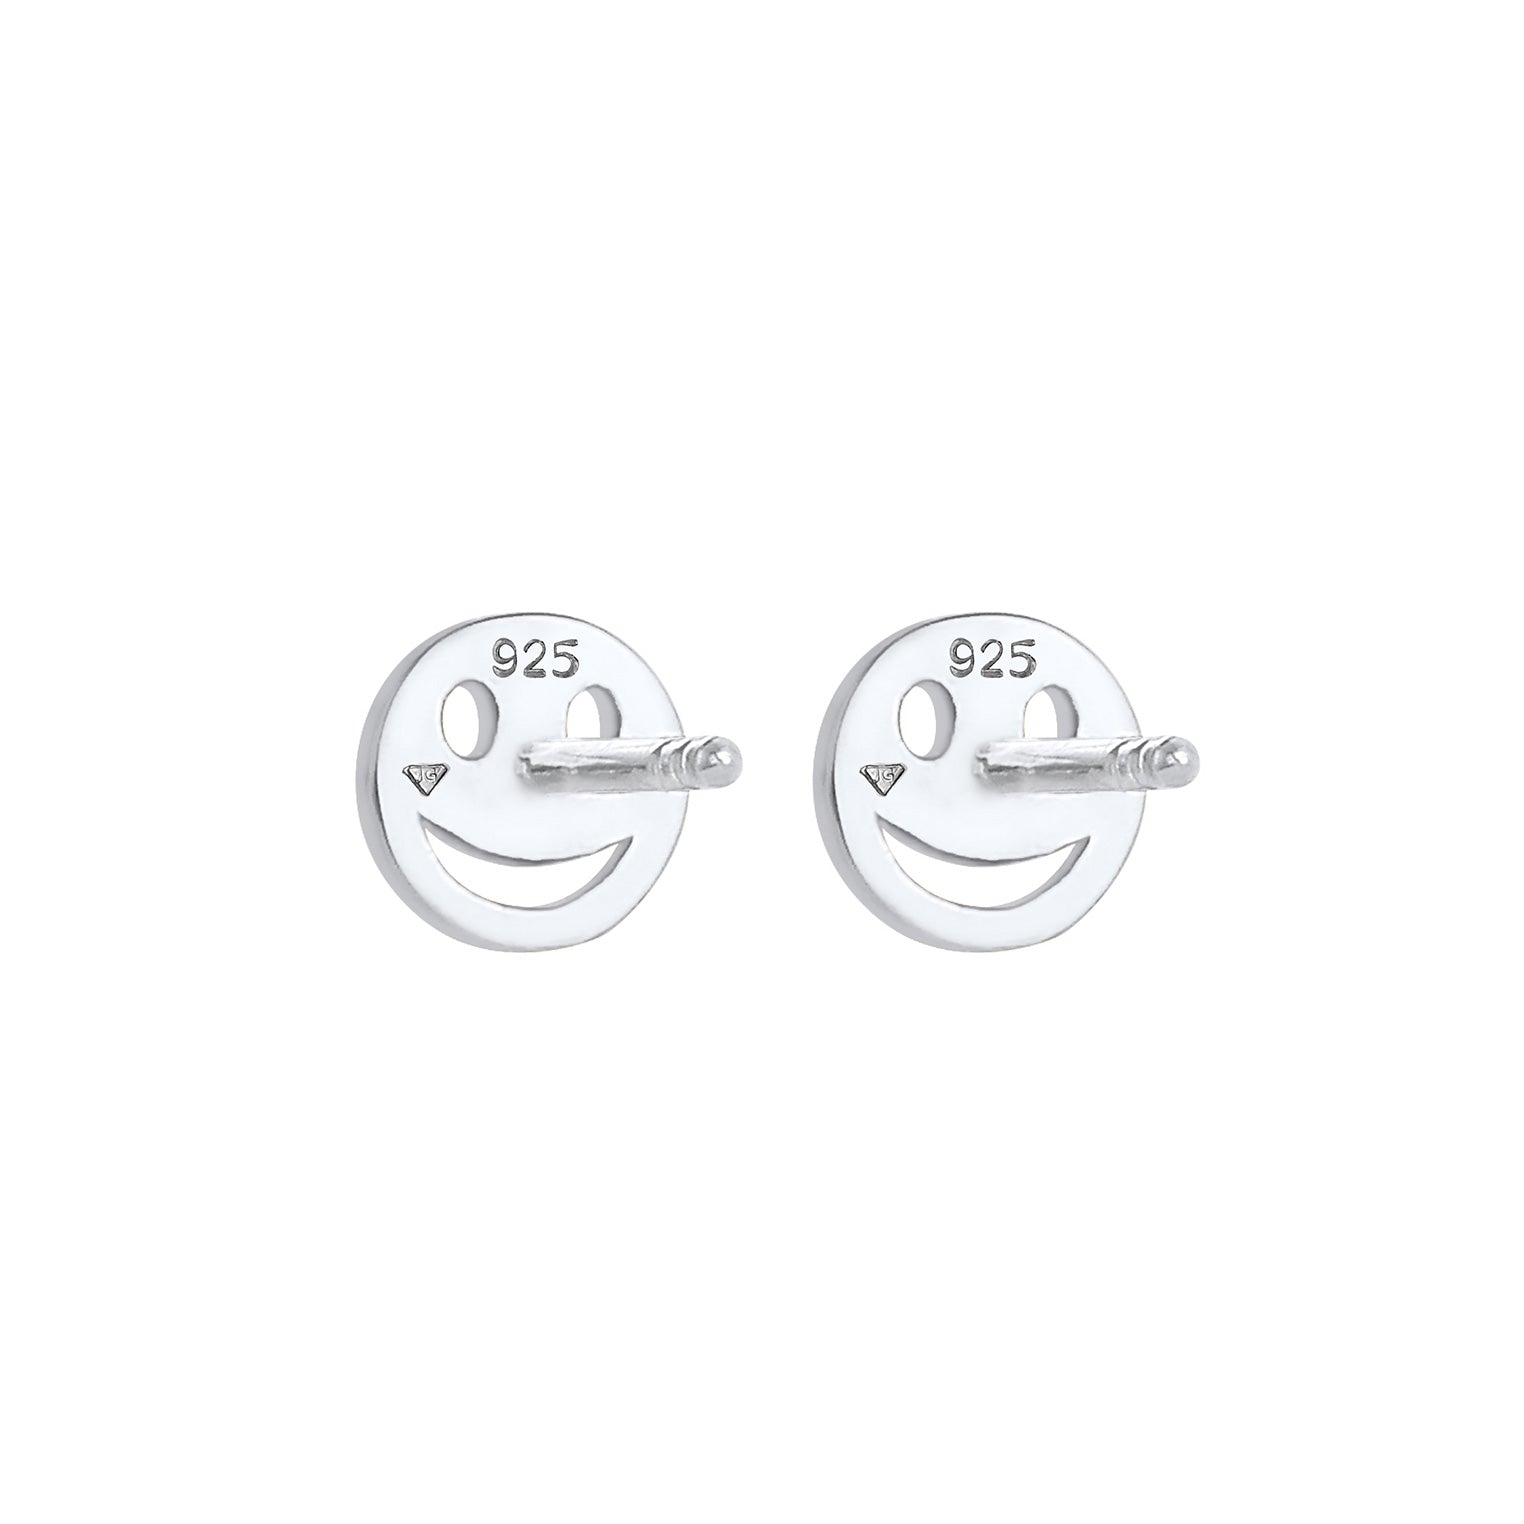 Jewelry Ohrring – Smiling mit Elli Face